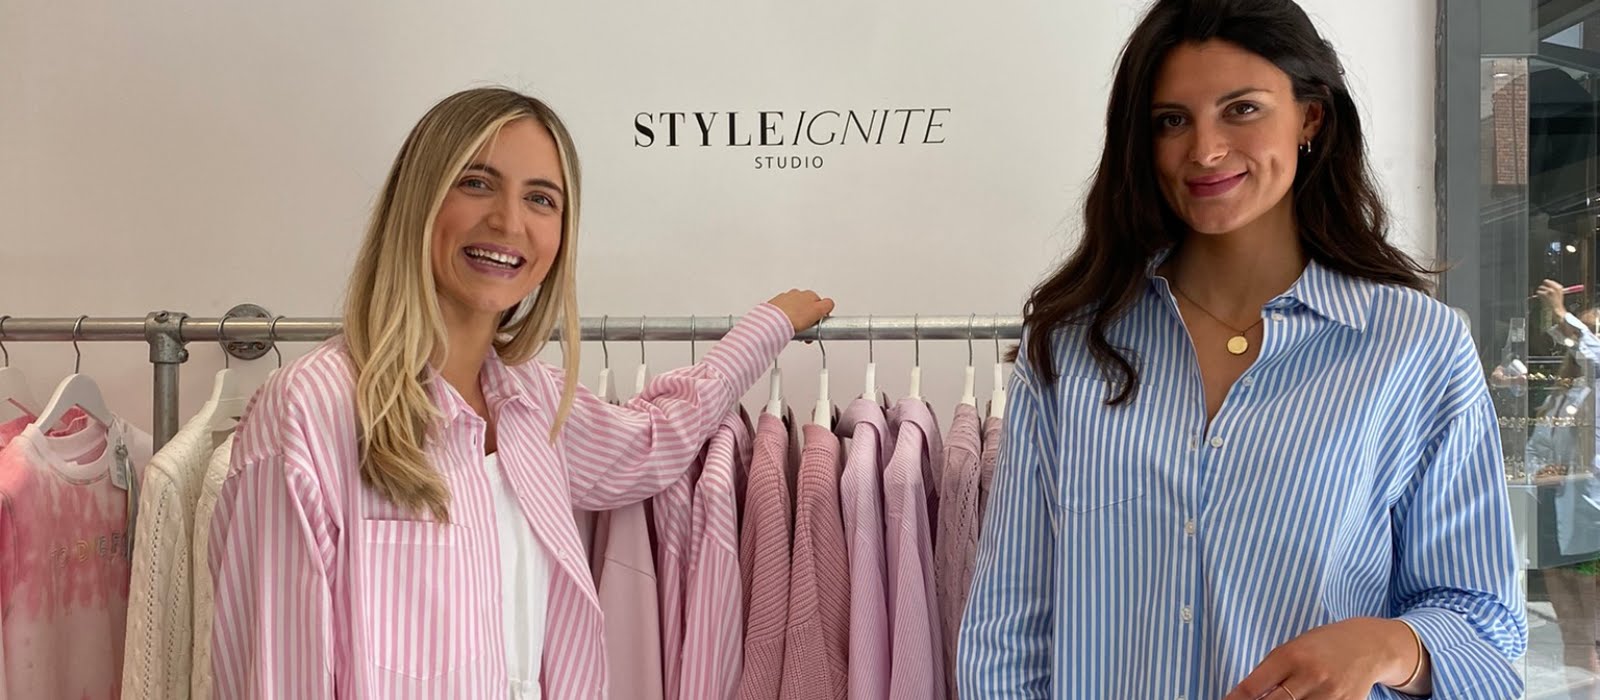 My Career: The Style Ignite sisters share their best business advice